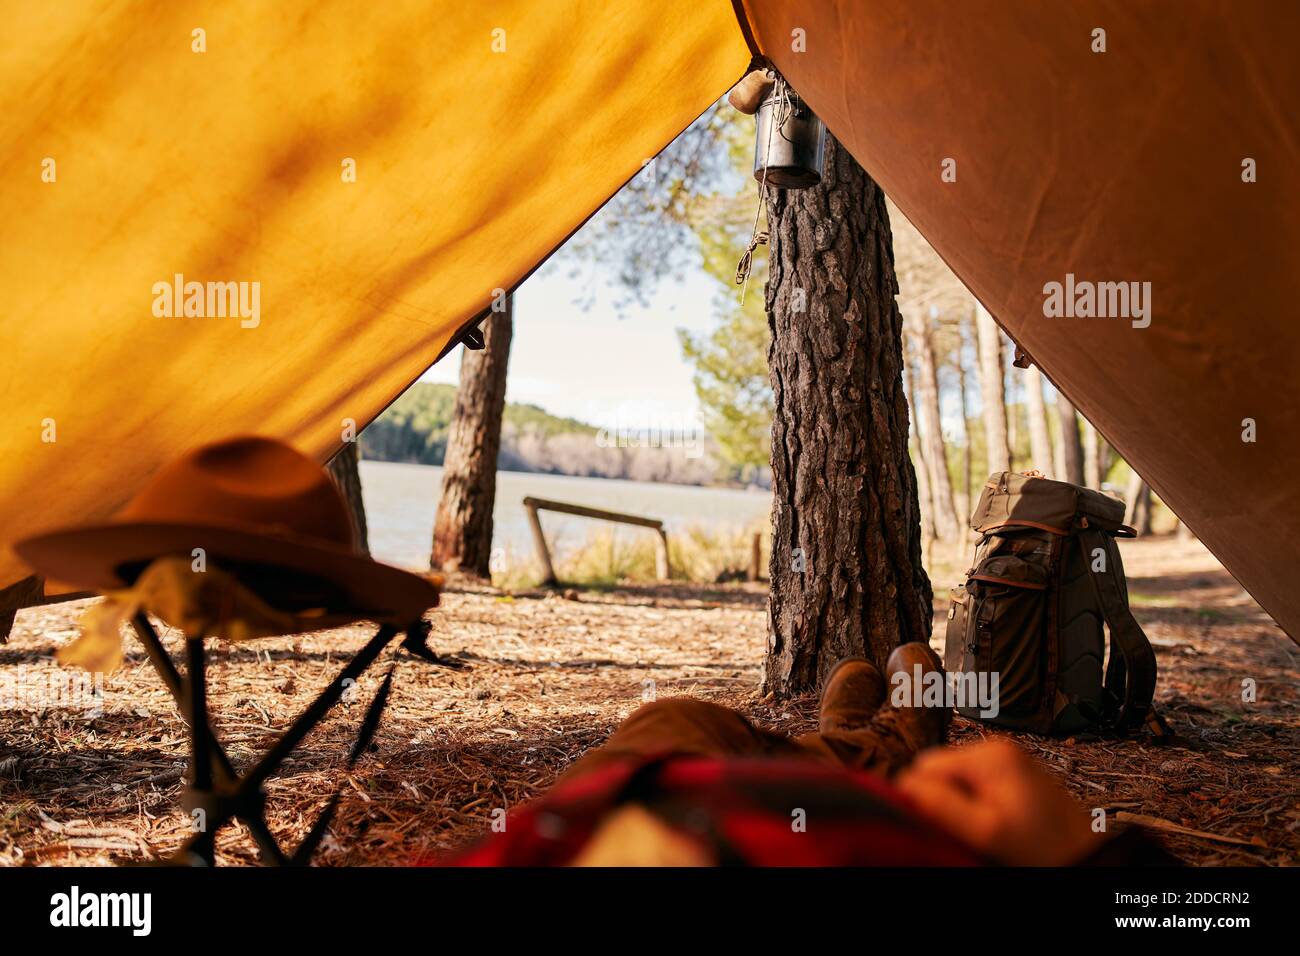 Low section of bushcrafter lying down under camping tent Stock Photo